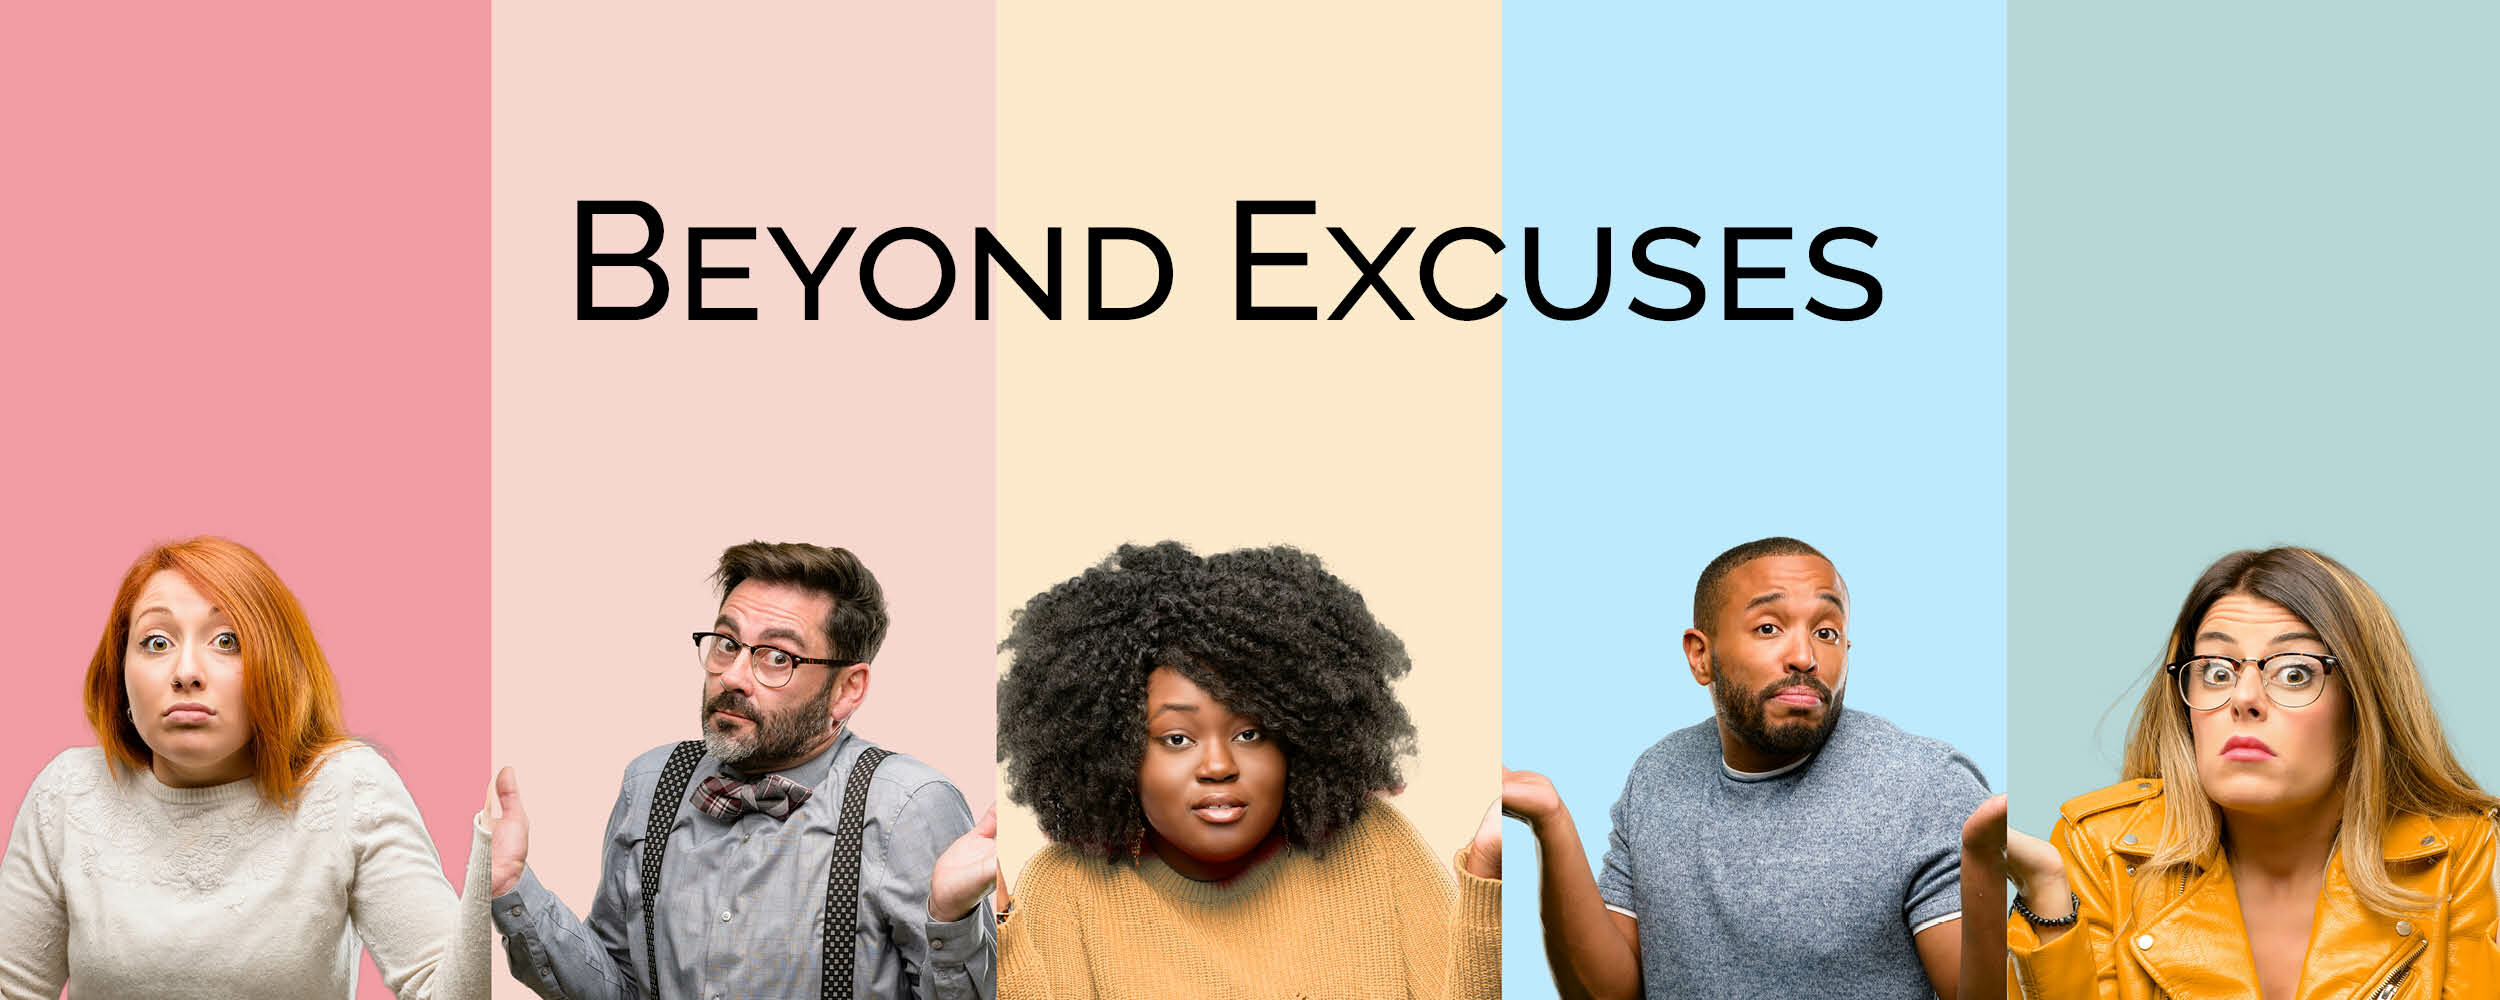 Beyond Excuses, Children's Message